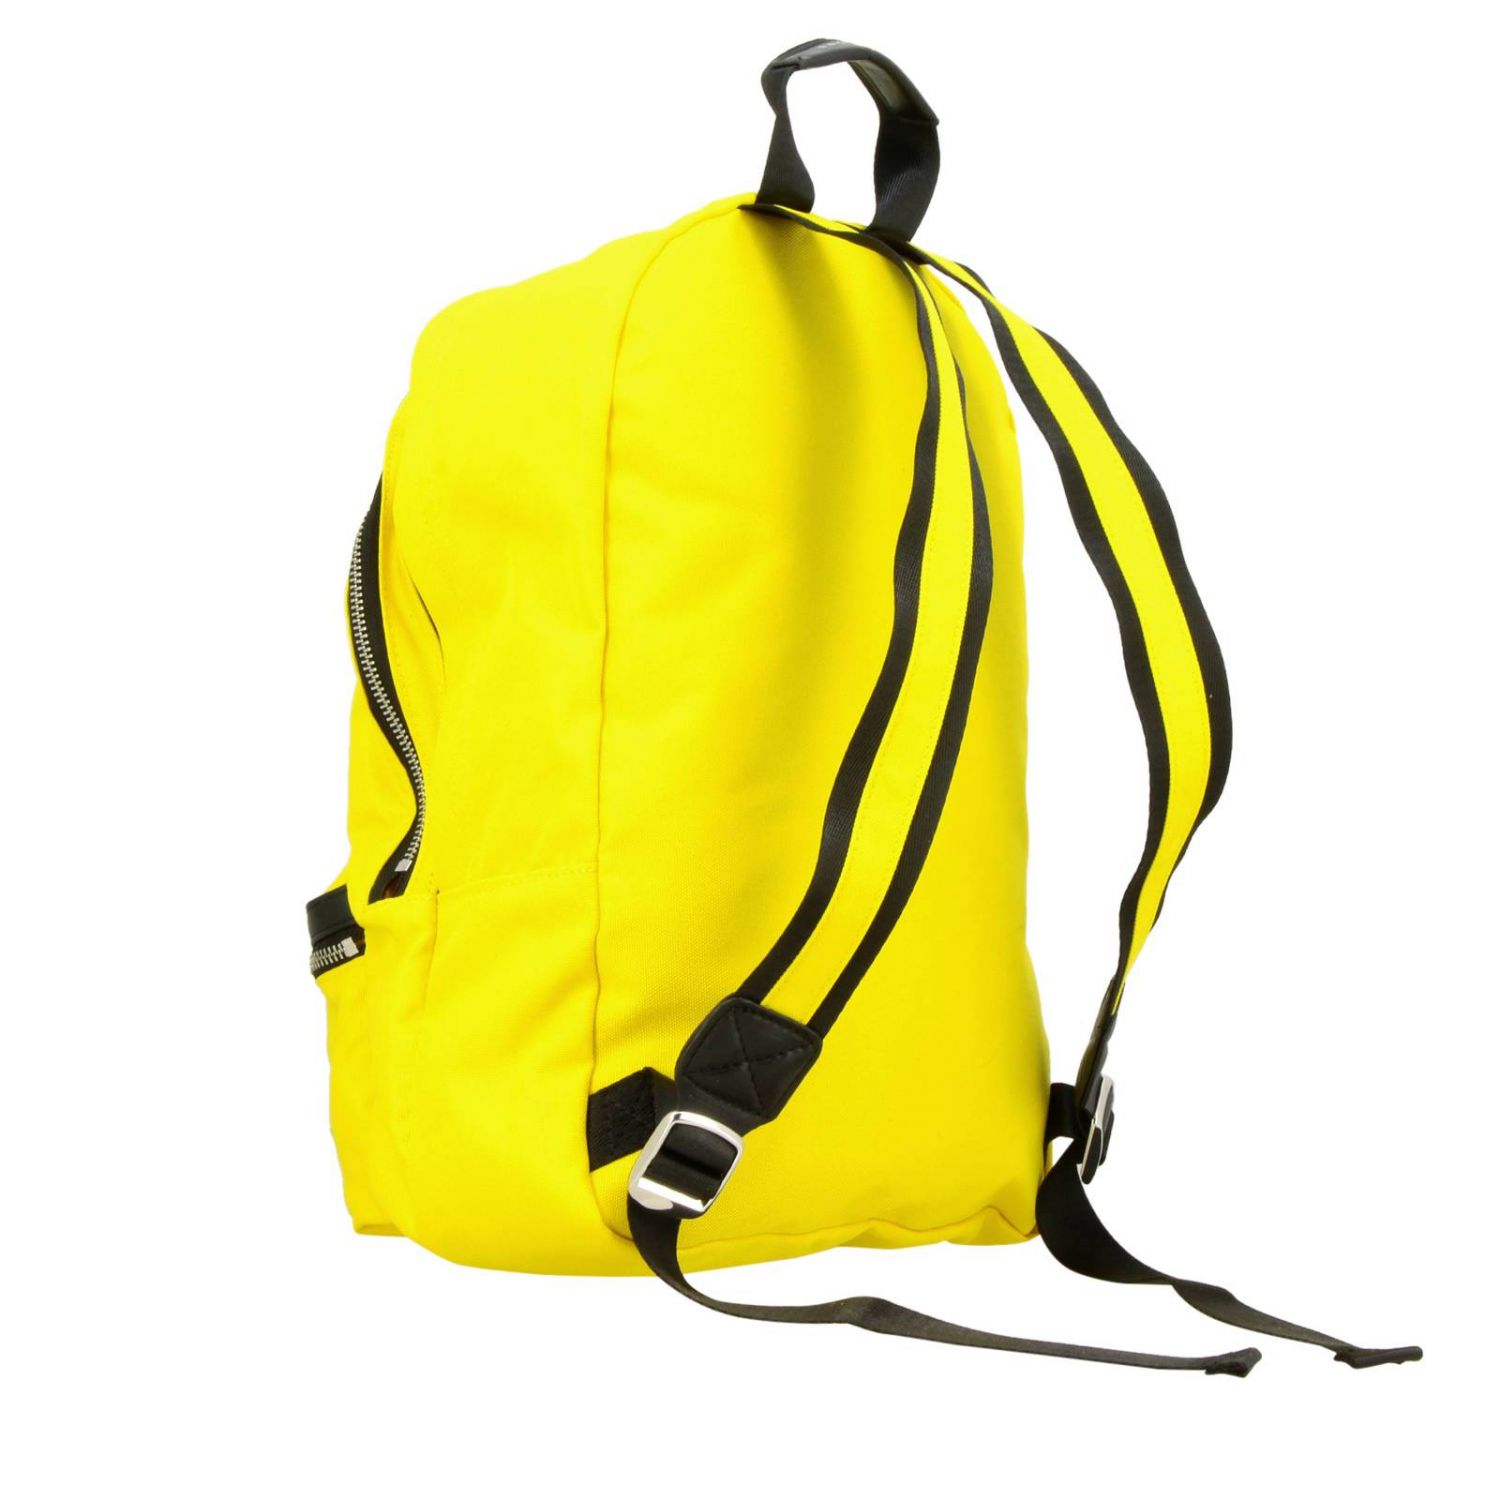 Little Marc Jacobs Outlet: duffel bag for kids - Yellow | Little Marc ...